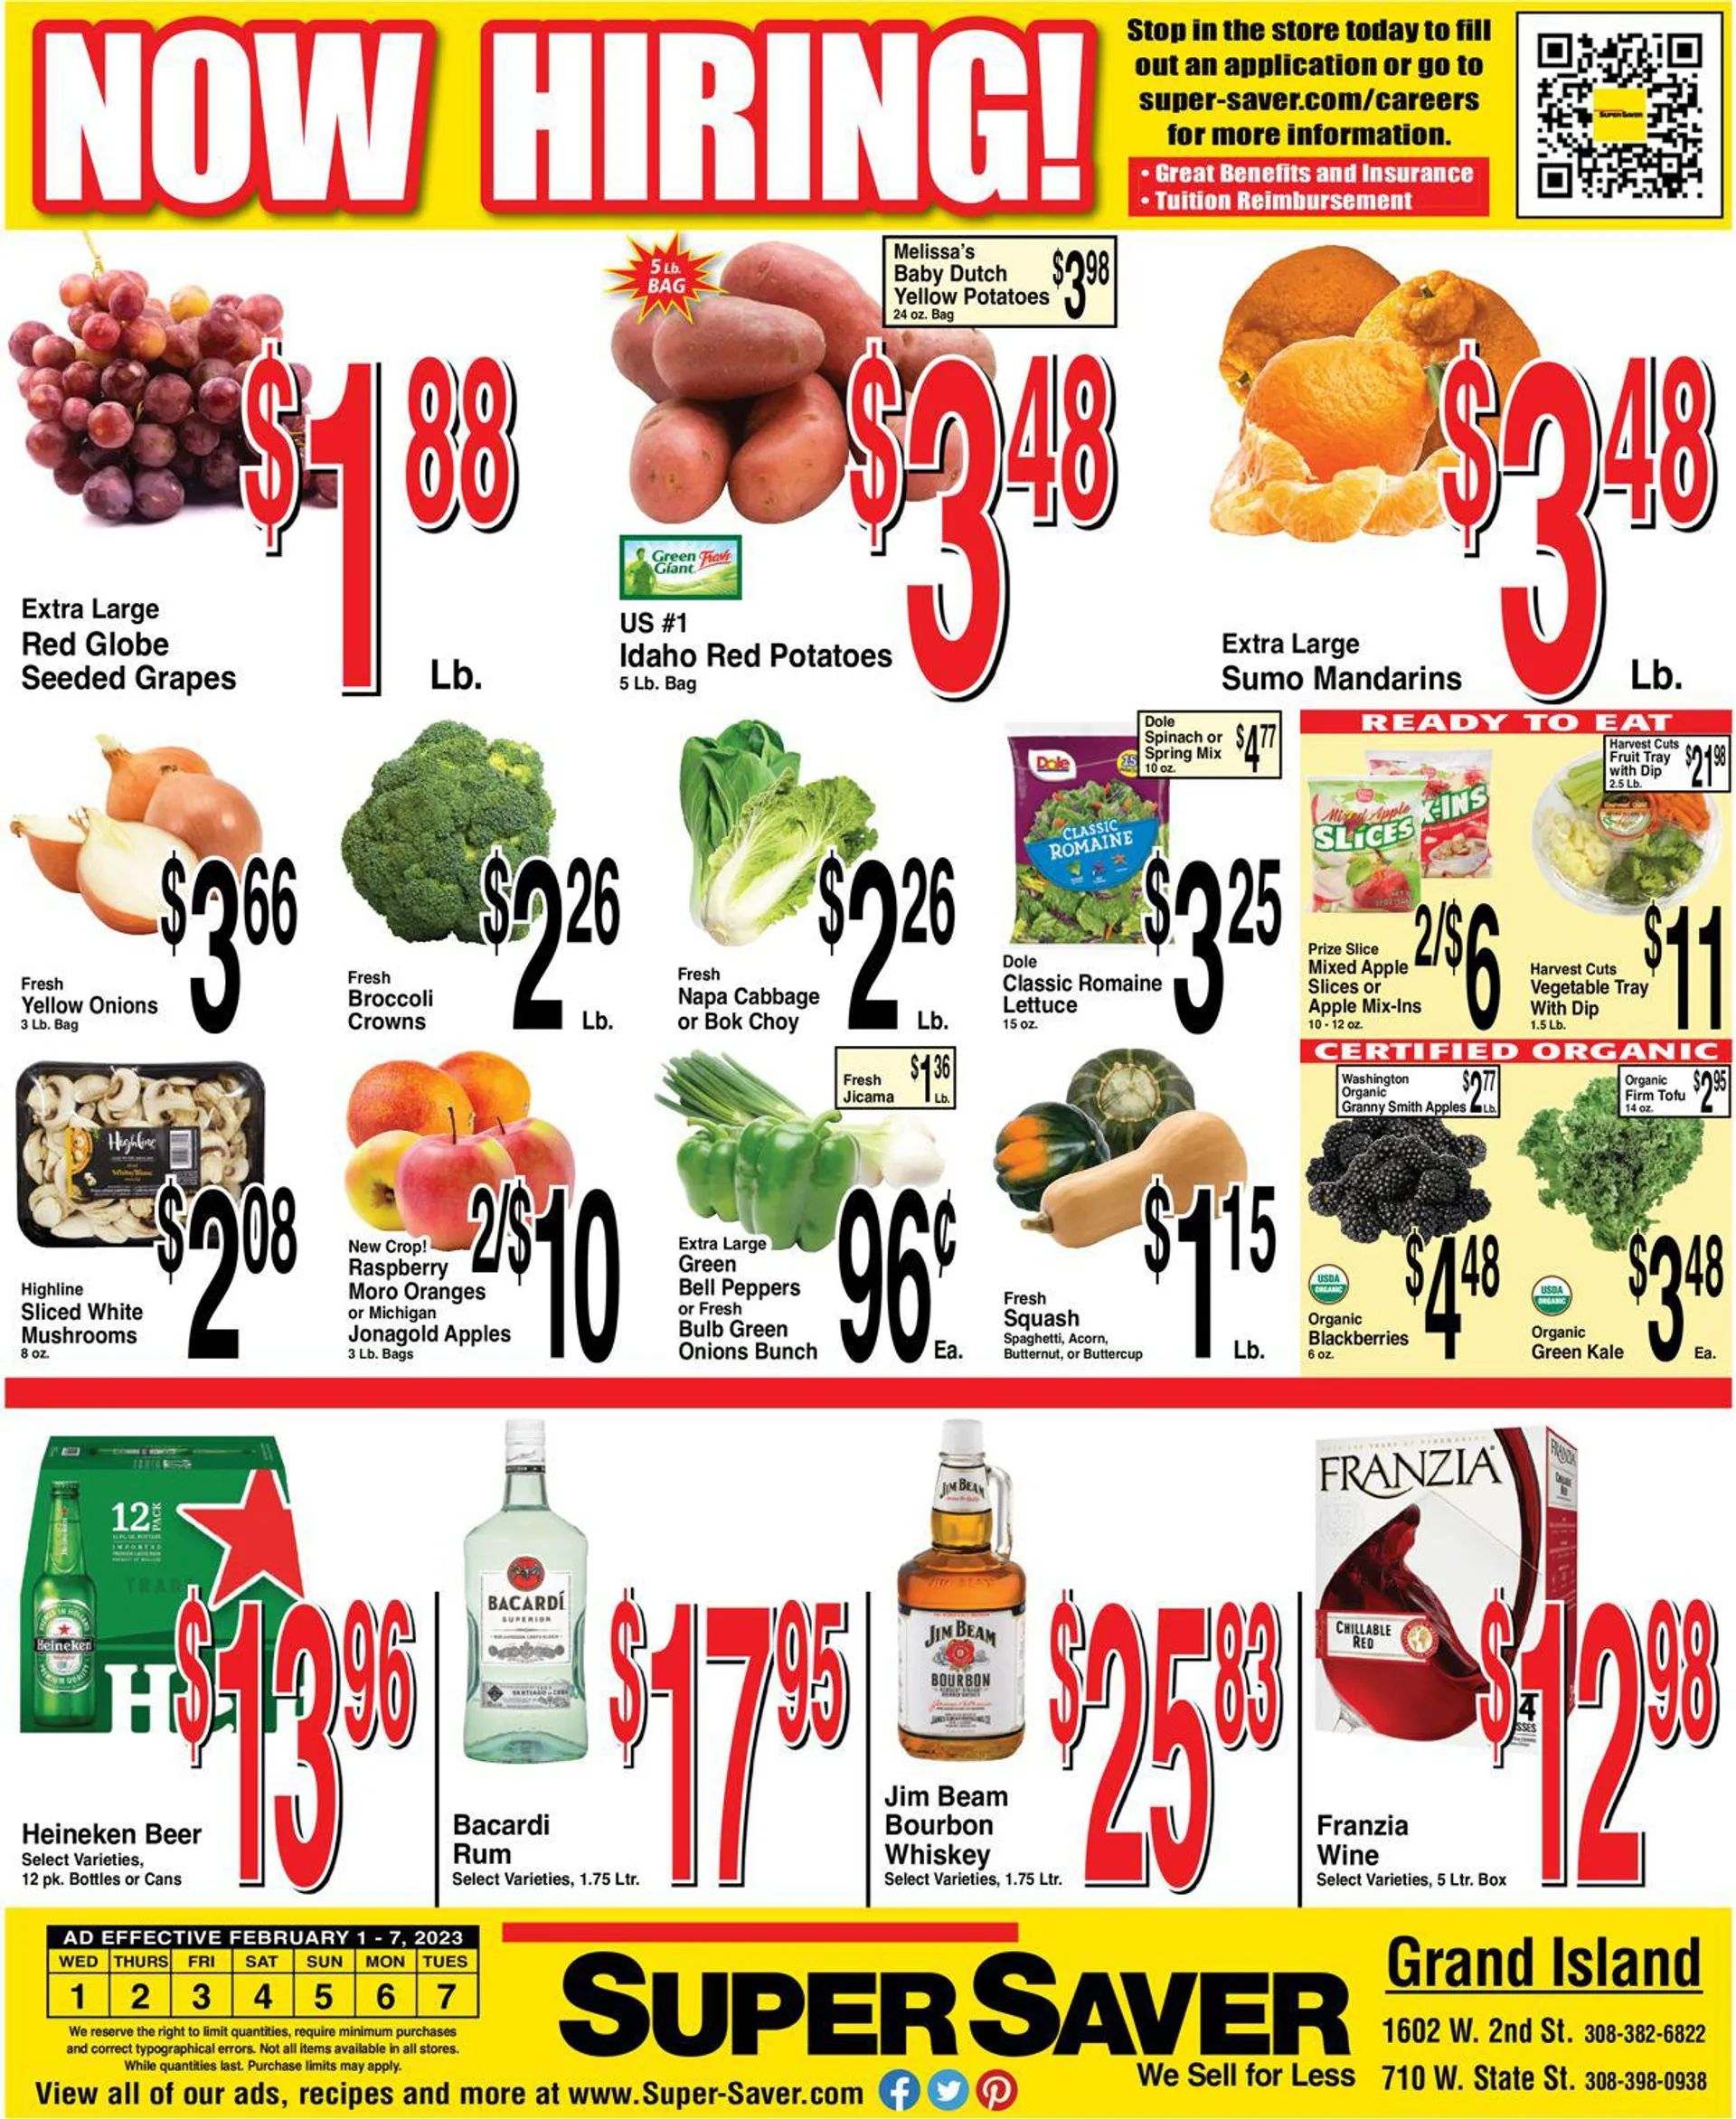 Super Saver Current weekly ad - 4